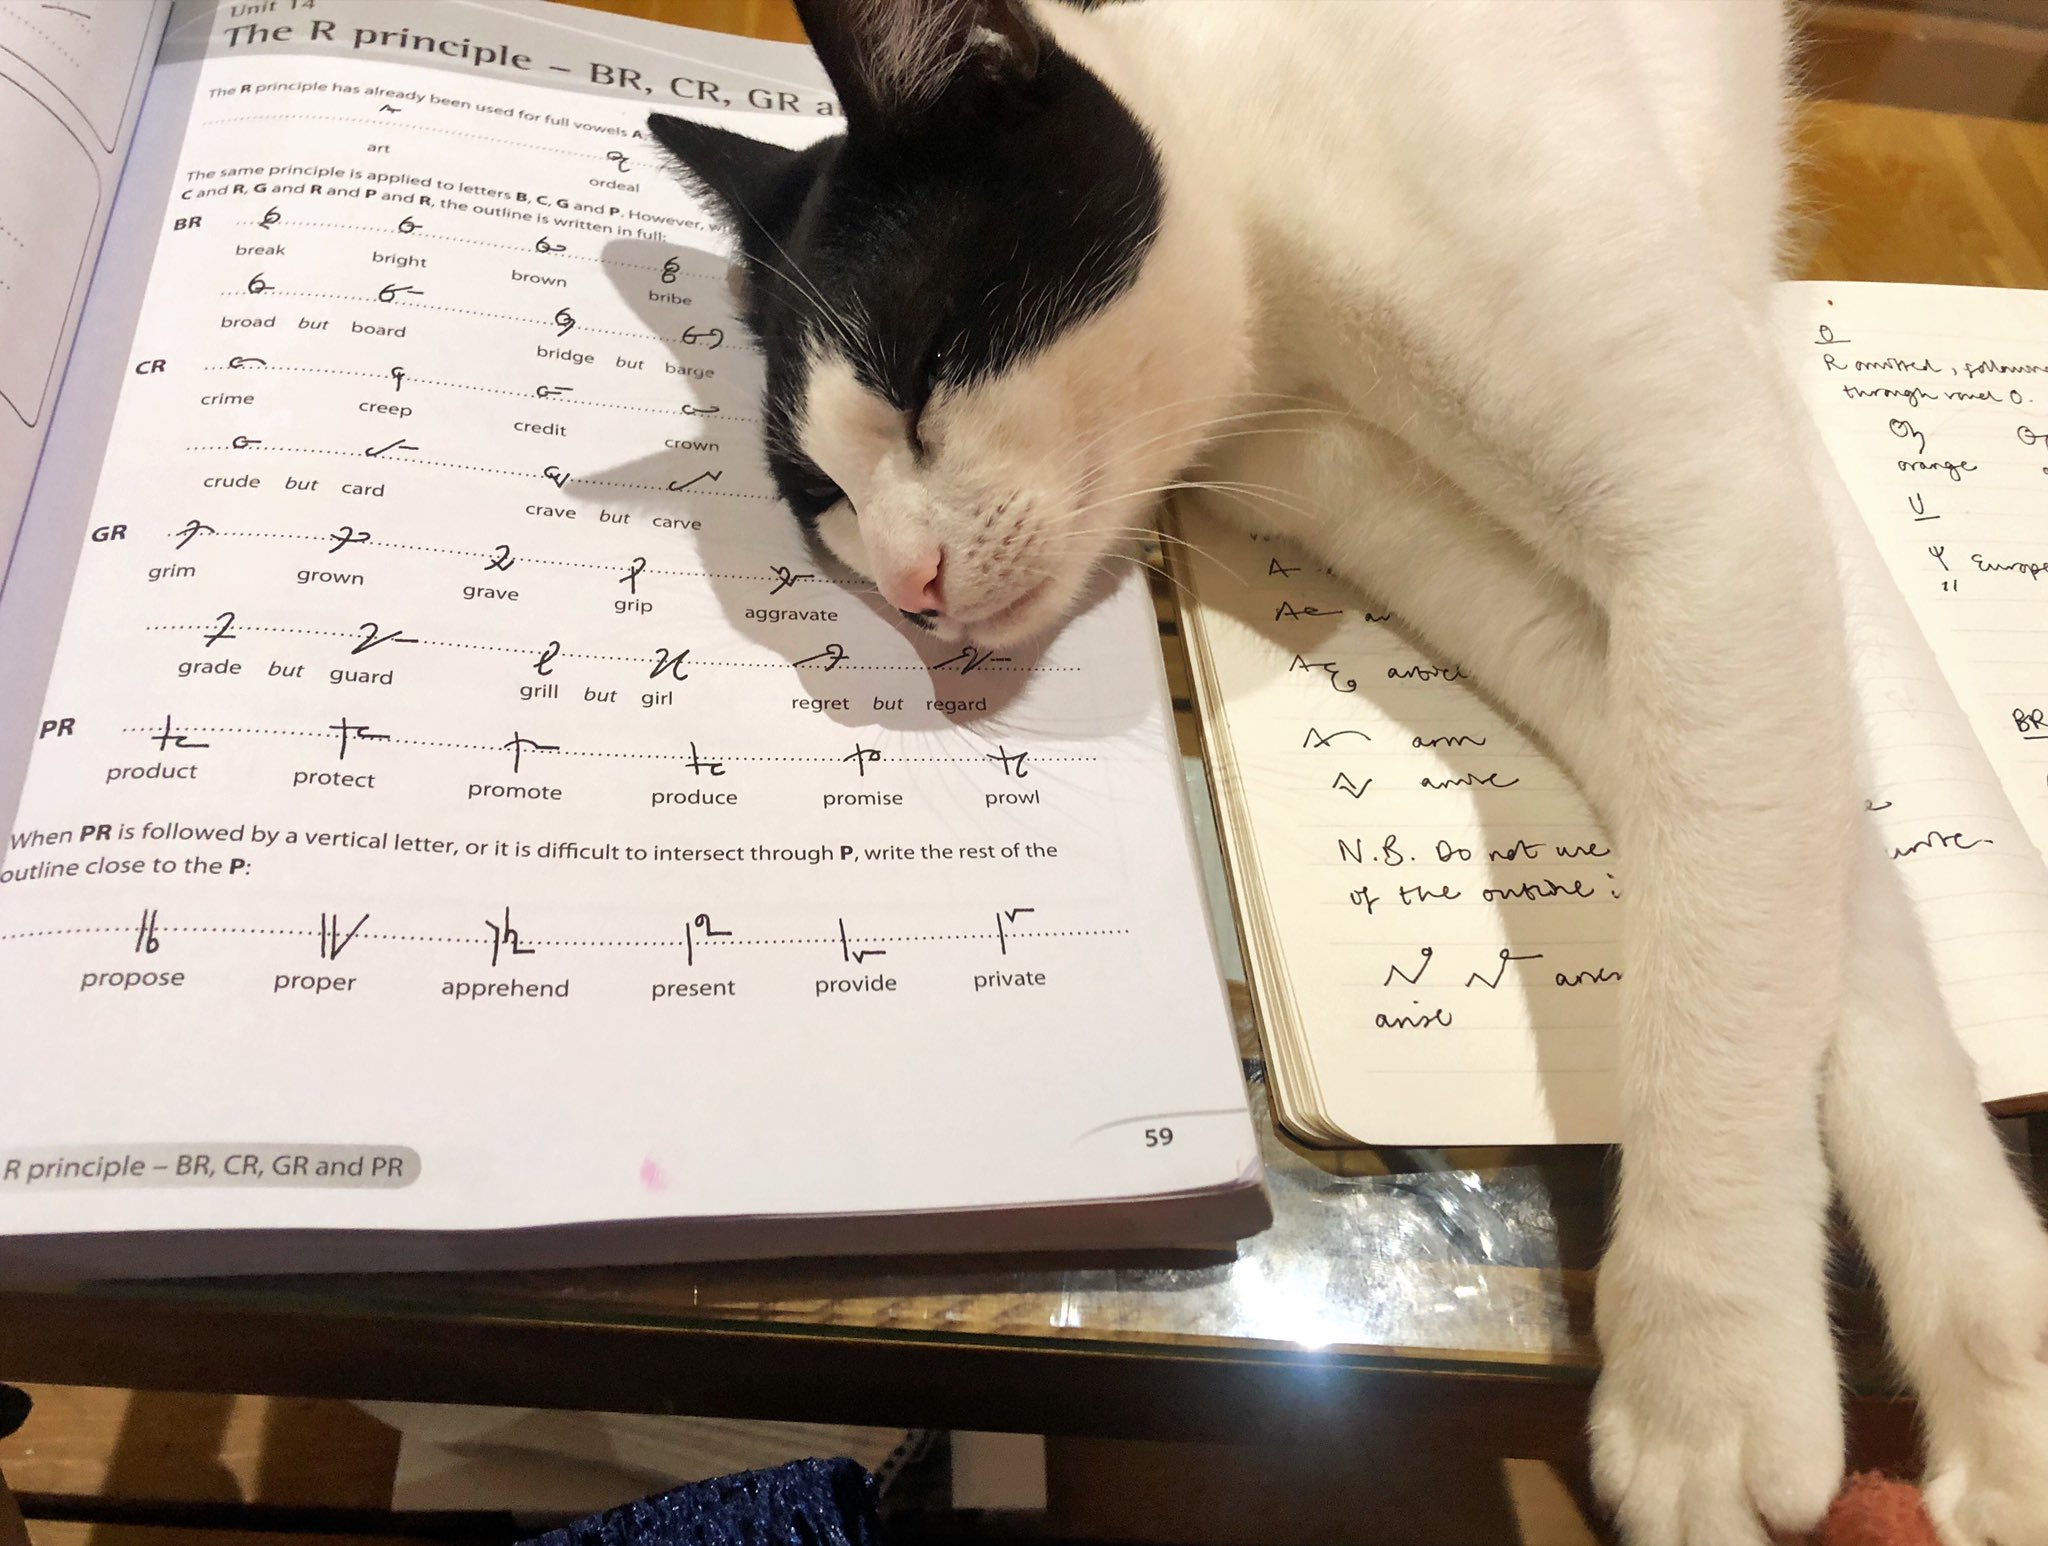 Black and white cat sleeping on someone's shorthand notes